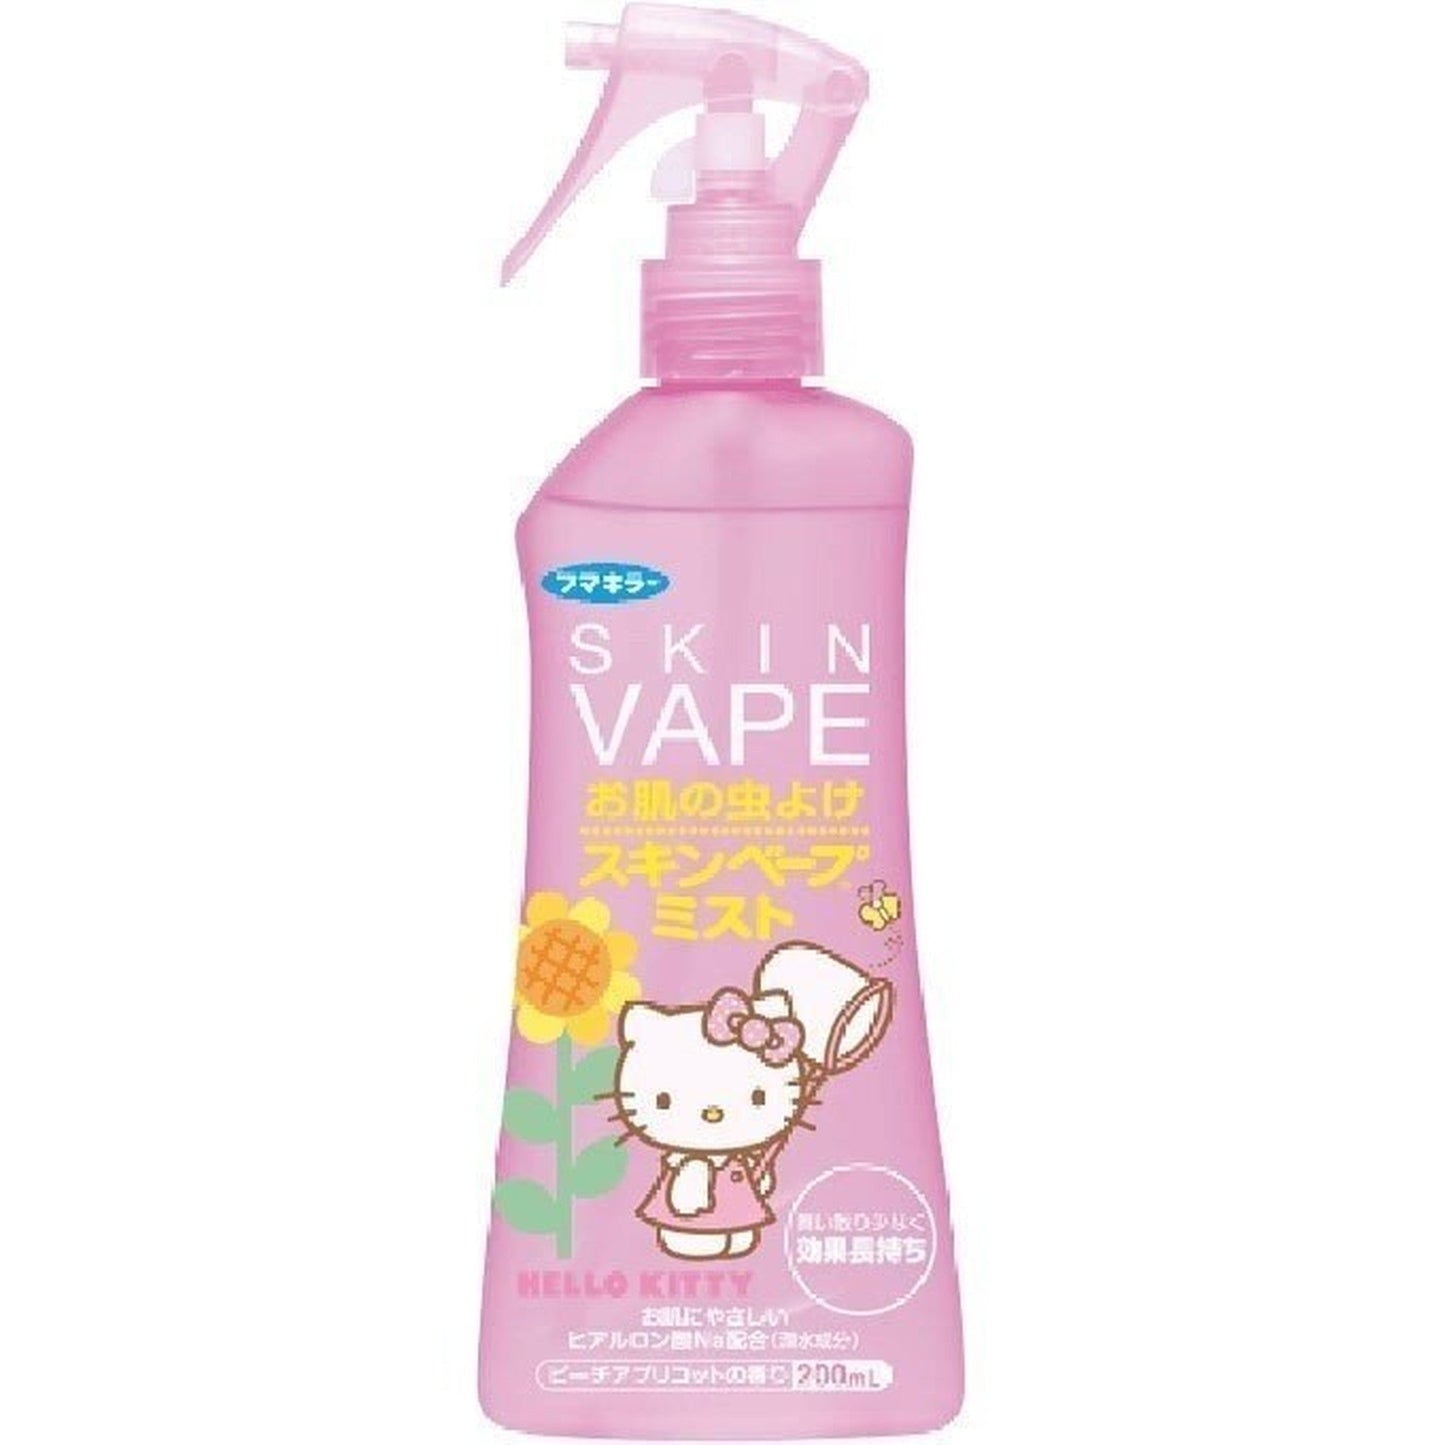 Fumakilla Skin Vape Mist Hello Kitty 200ml Peach Insect Repellent Insect Repellent Spray JAN:490242443308